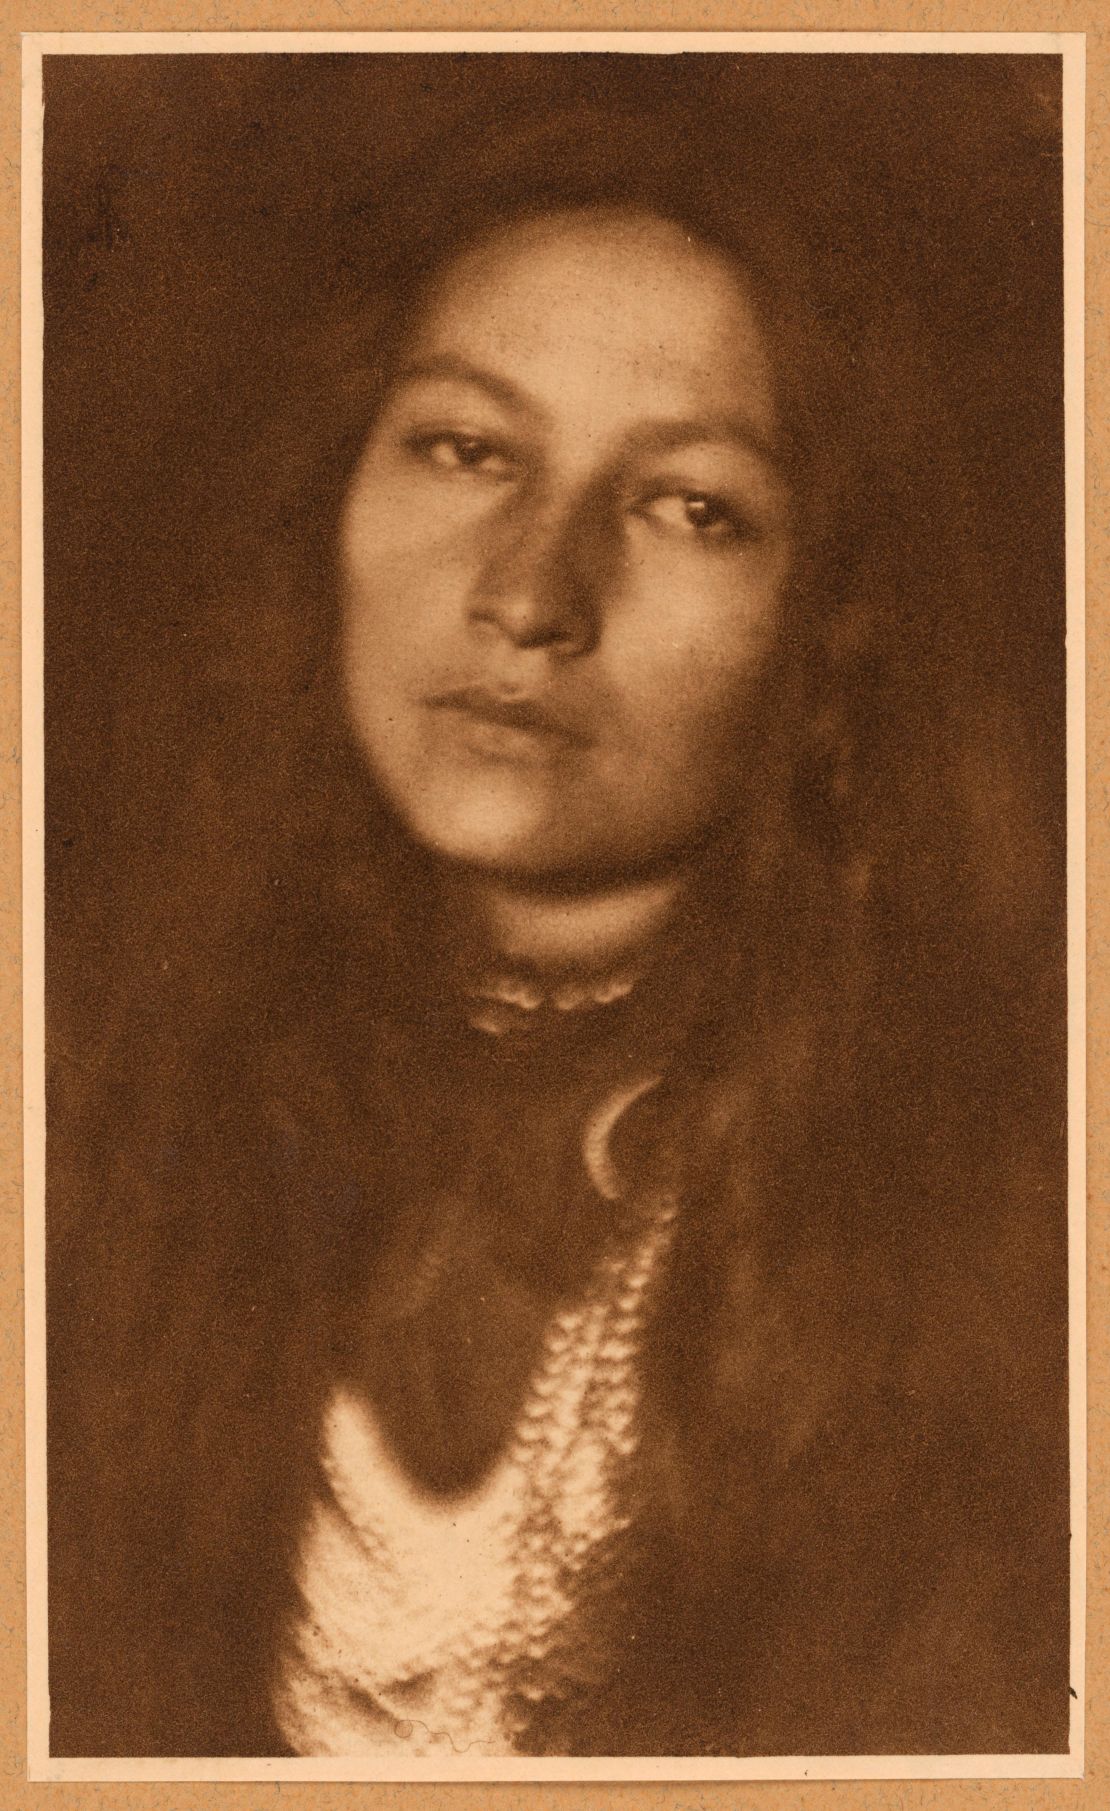 A 1898 portrait of Yankton Dakota Sioux writer and activist Zitkala-sa, who campaigned for the citizenship rights of Native Americans. 